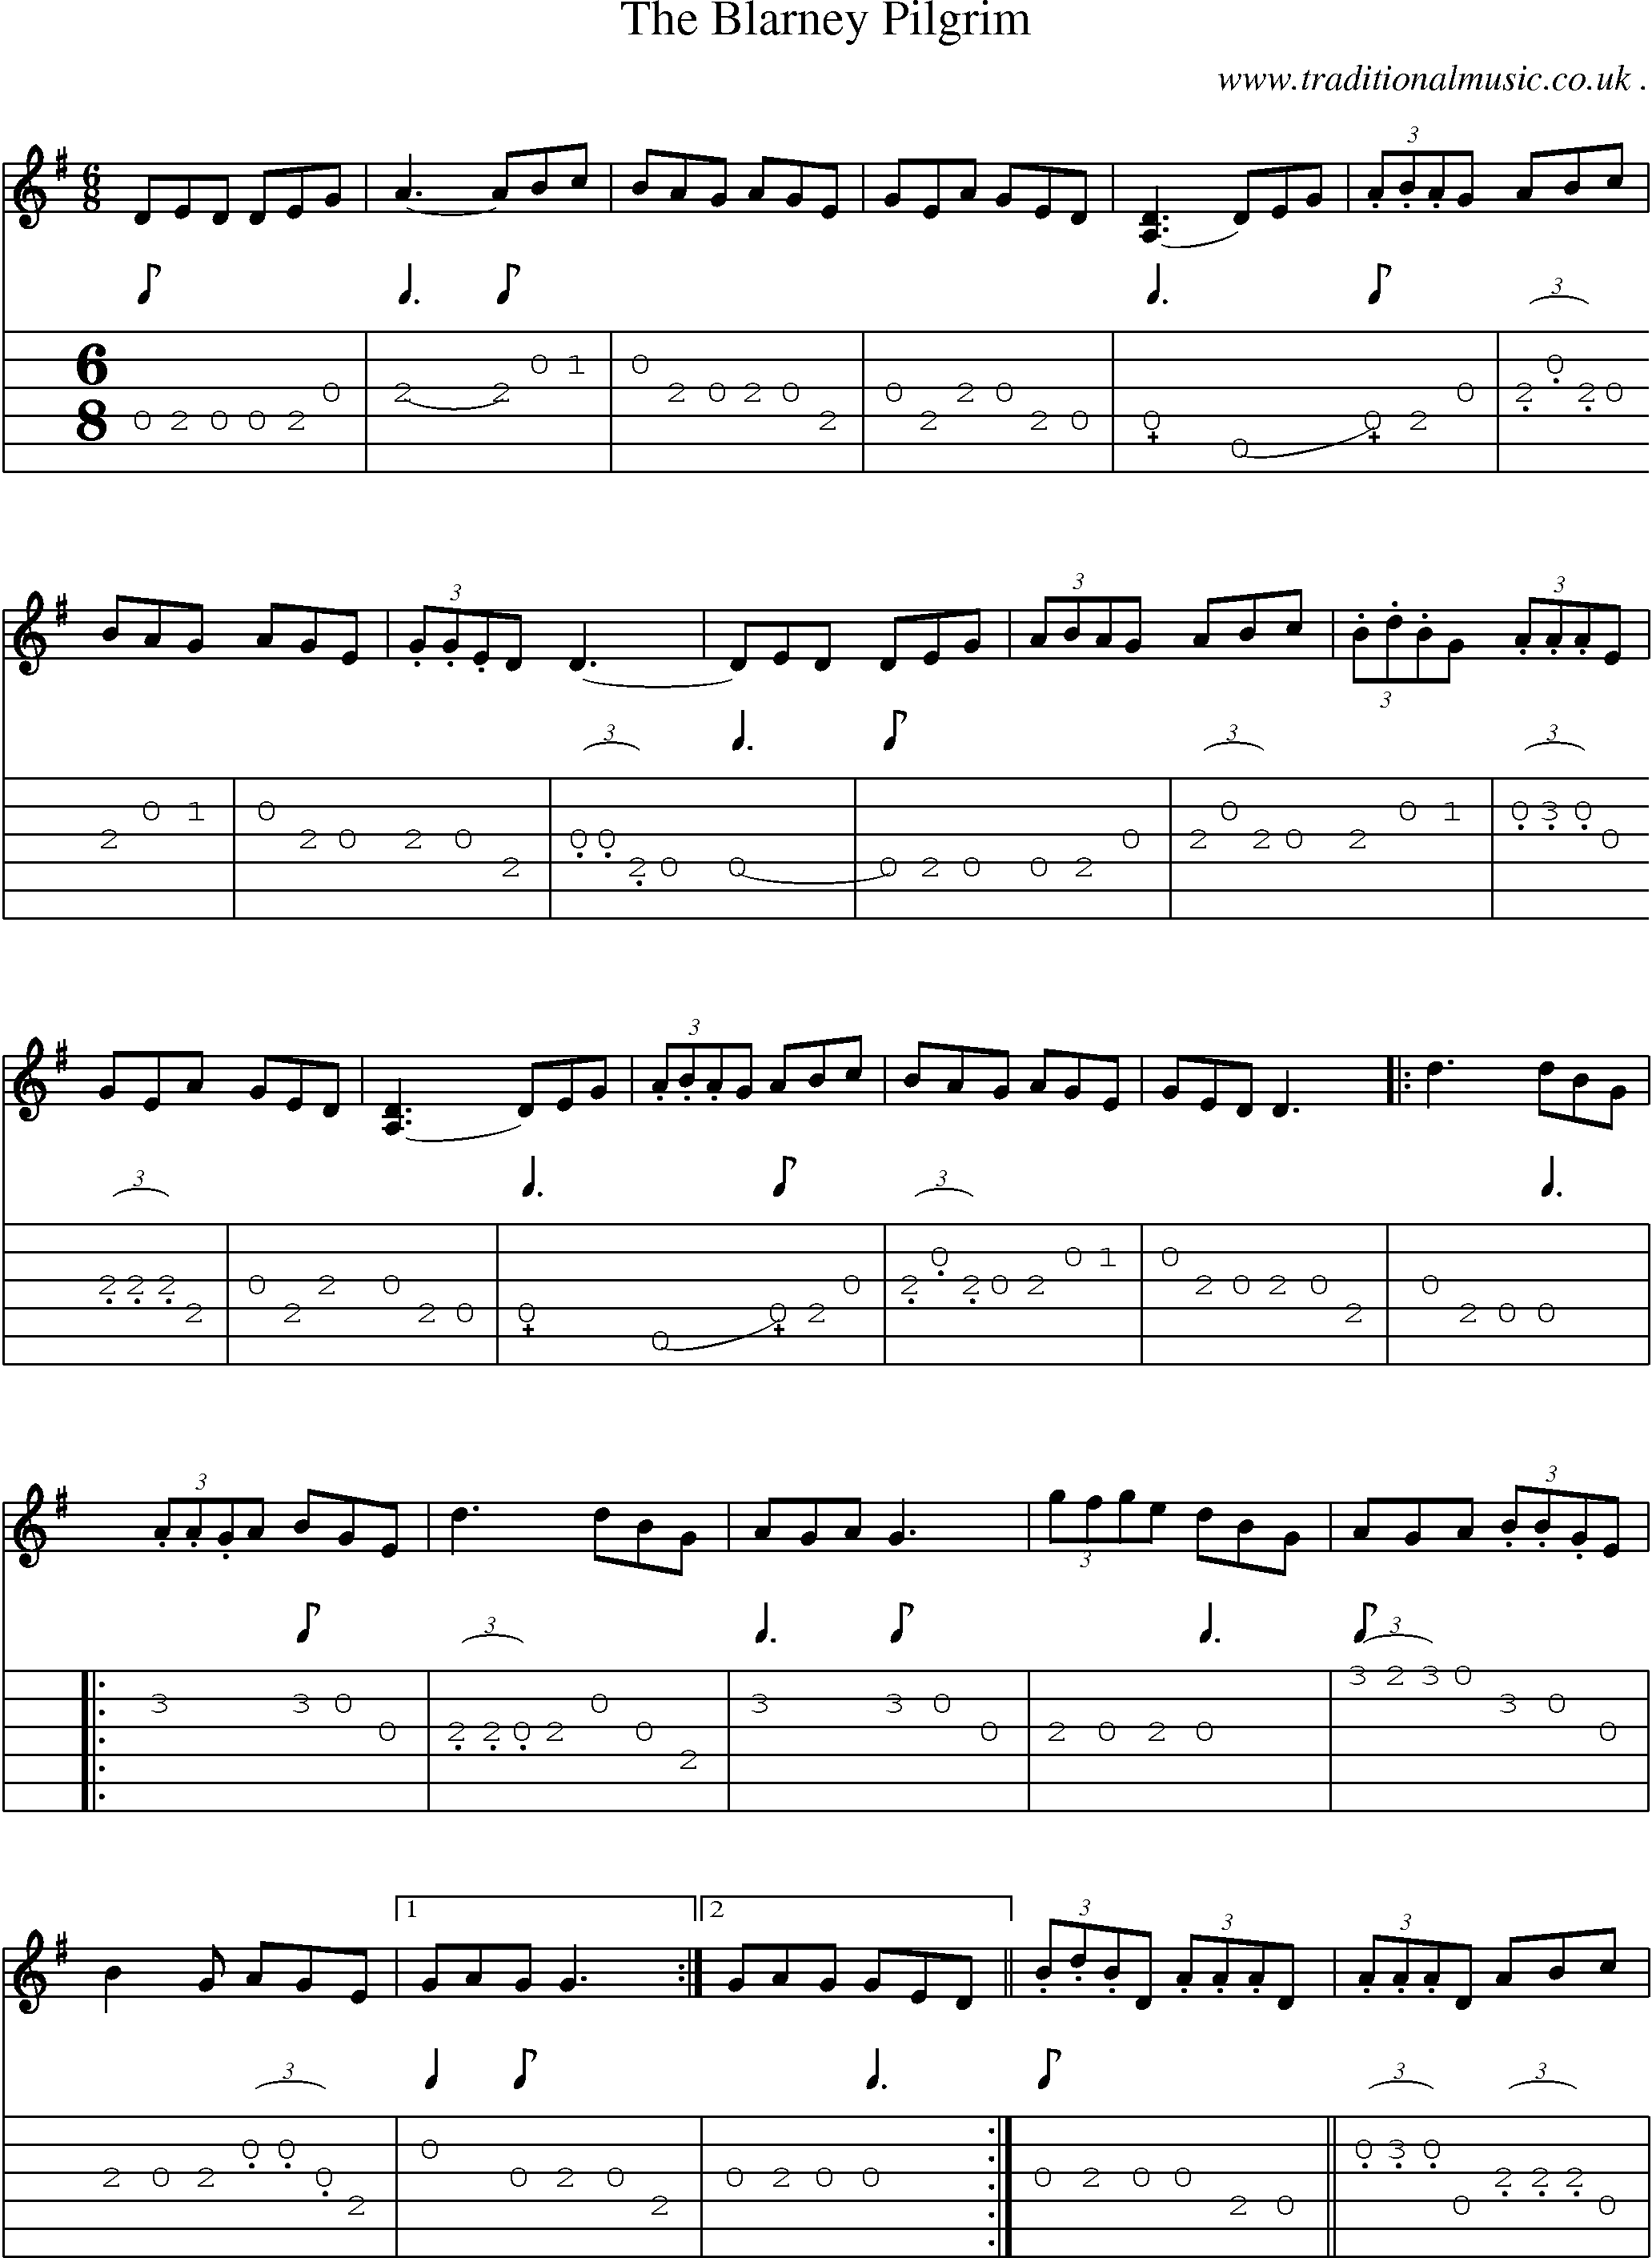 Sheet-Music and Guitar Tabs for The Blarney Pilgrim